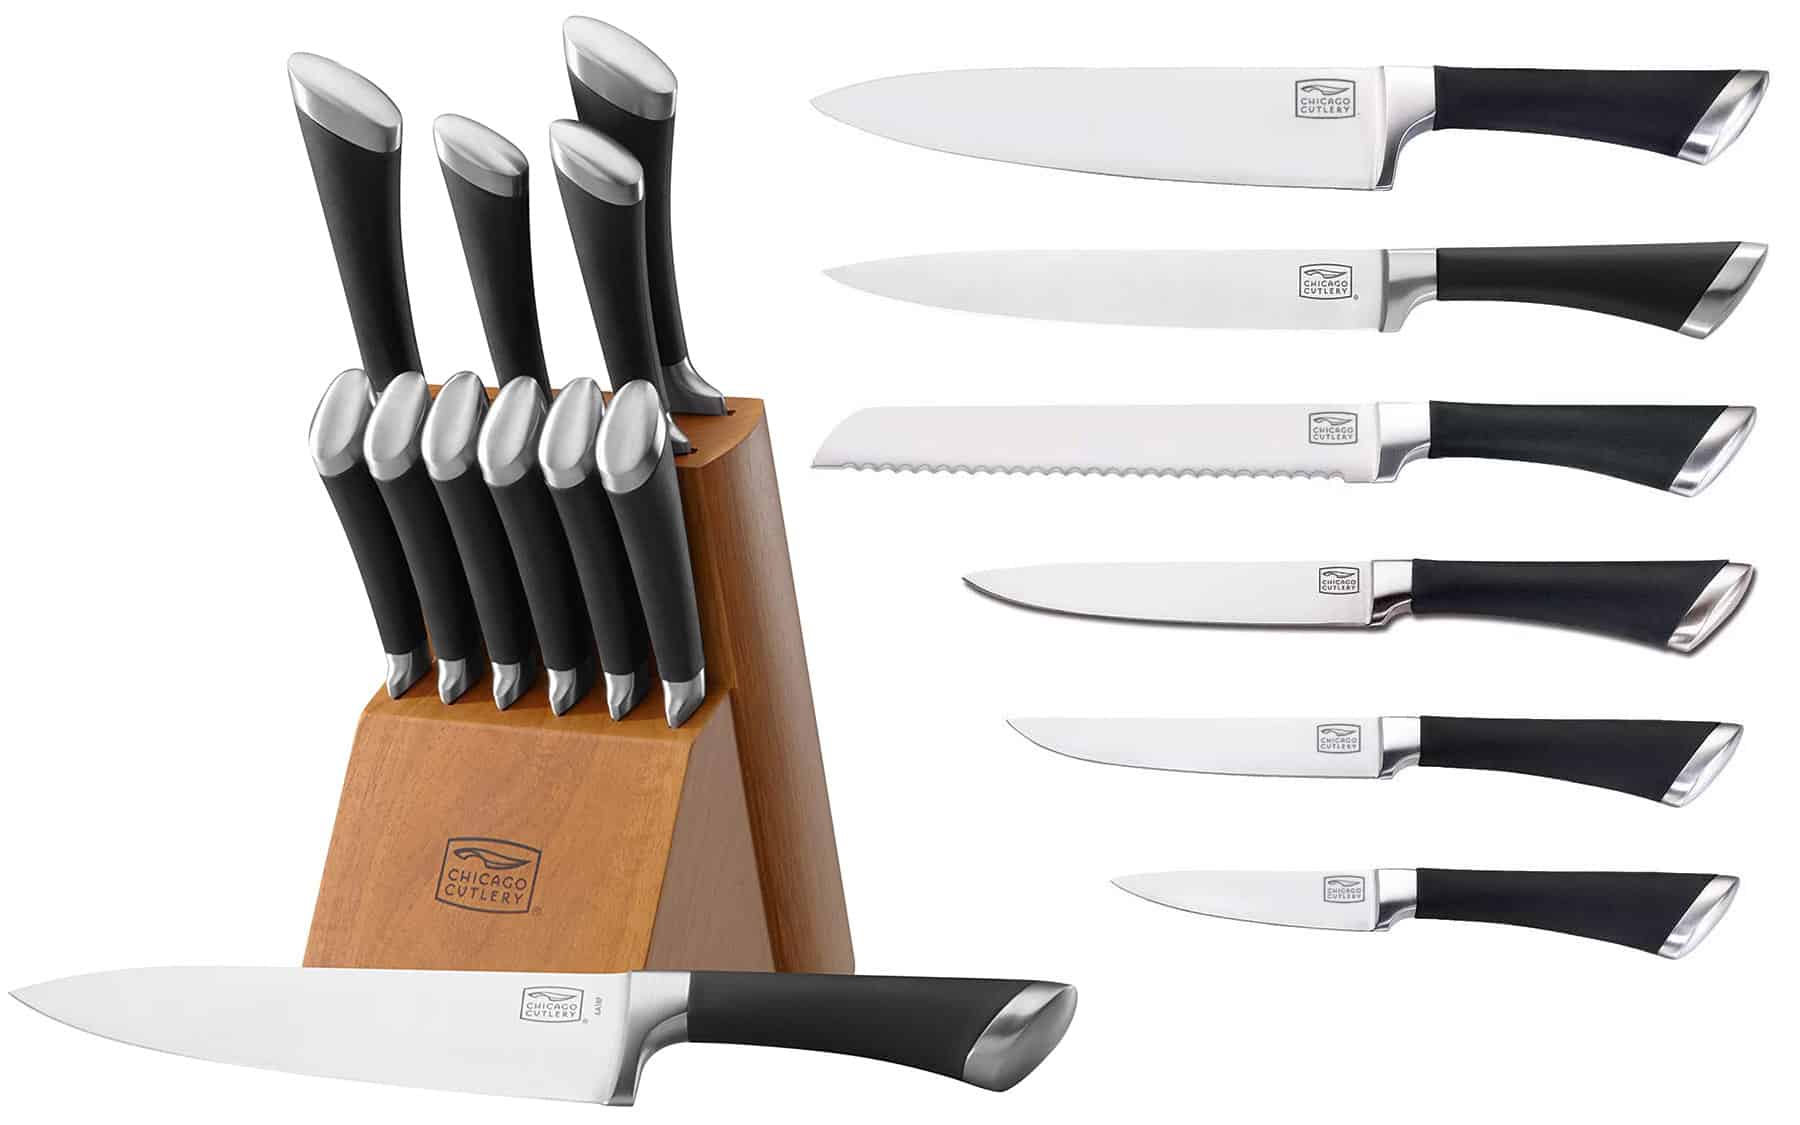 Key knives for your kitchen, and others to consider for your collection -  The San Diego Union-Tribune